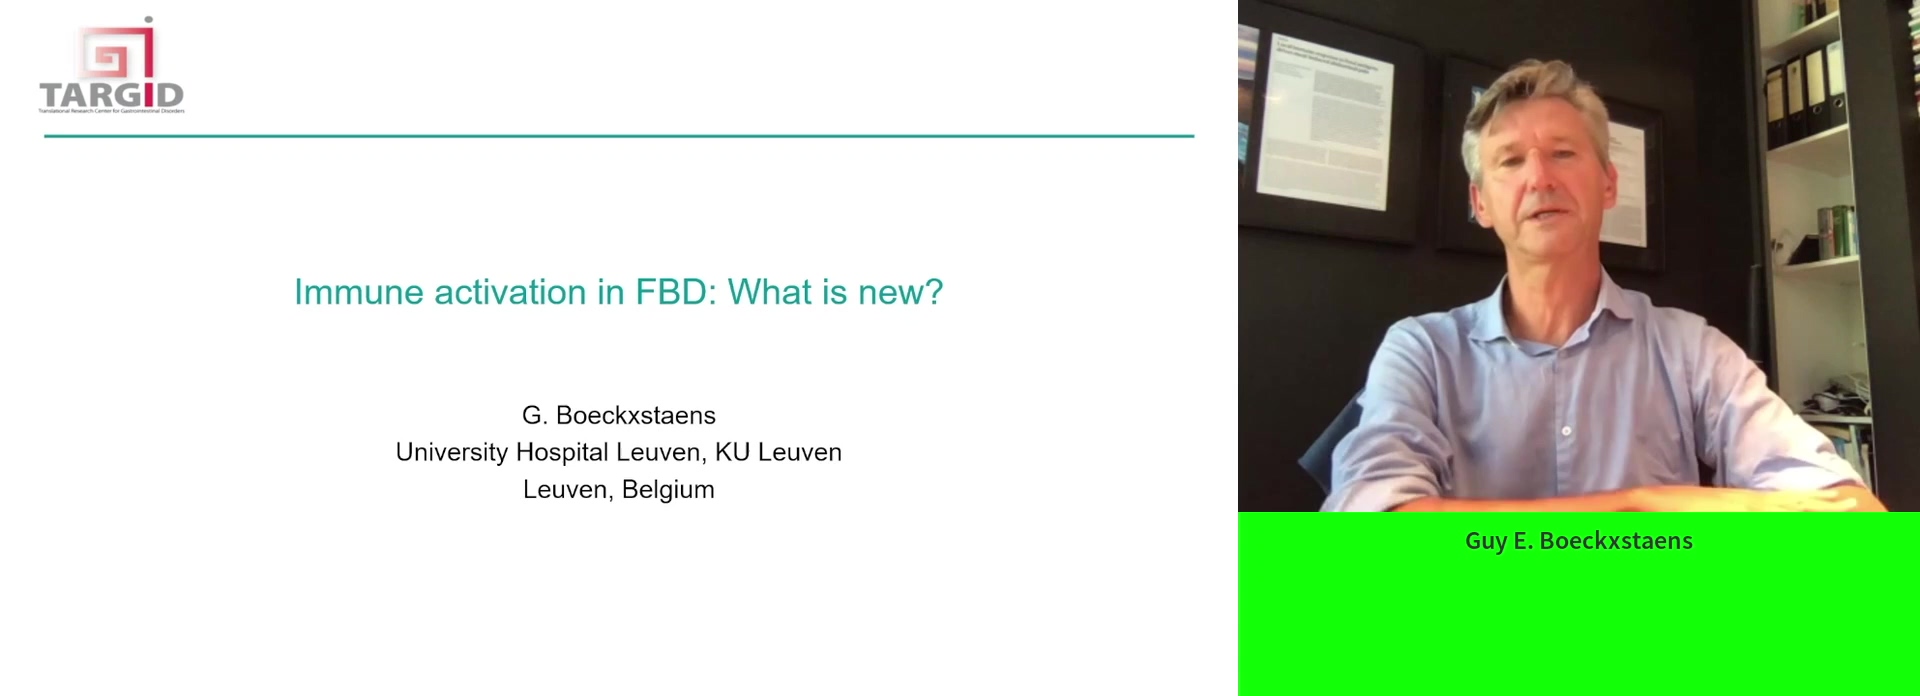 Immune activation in FBD: What is new?